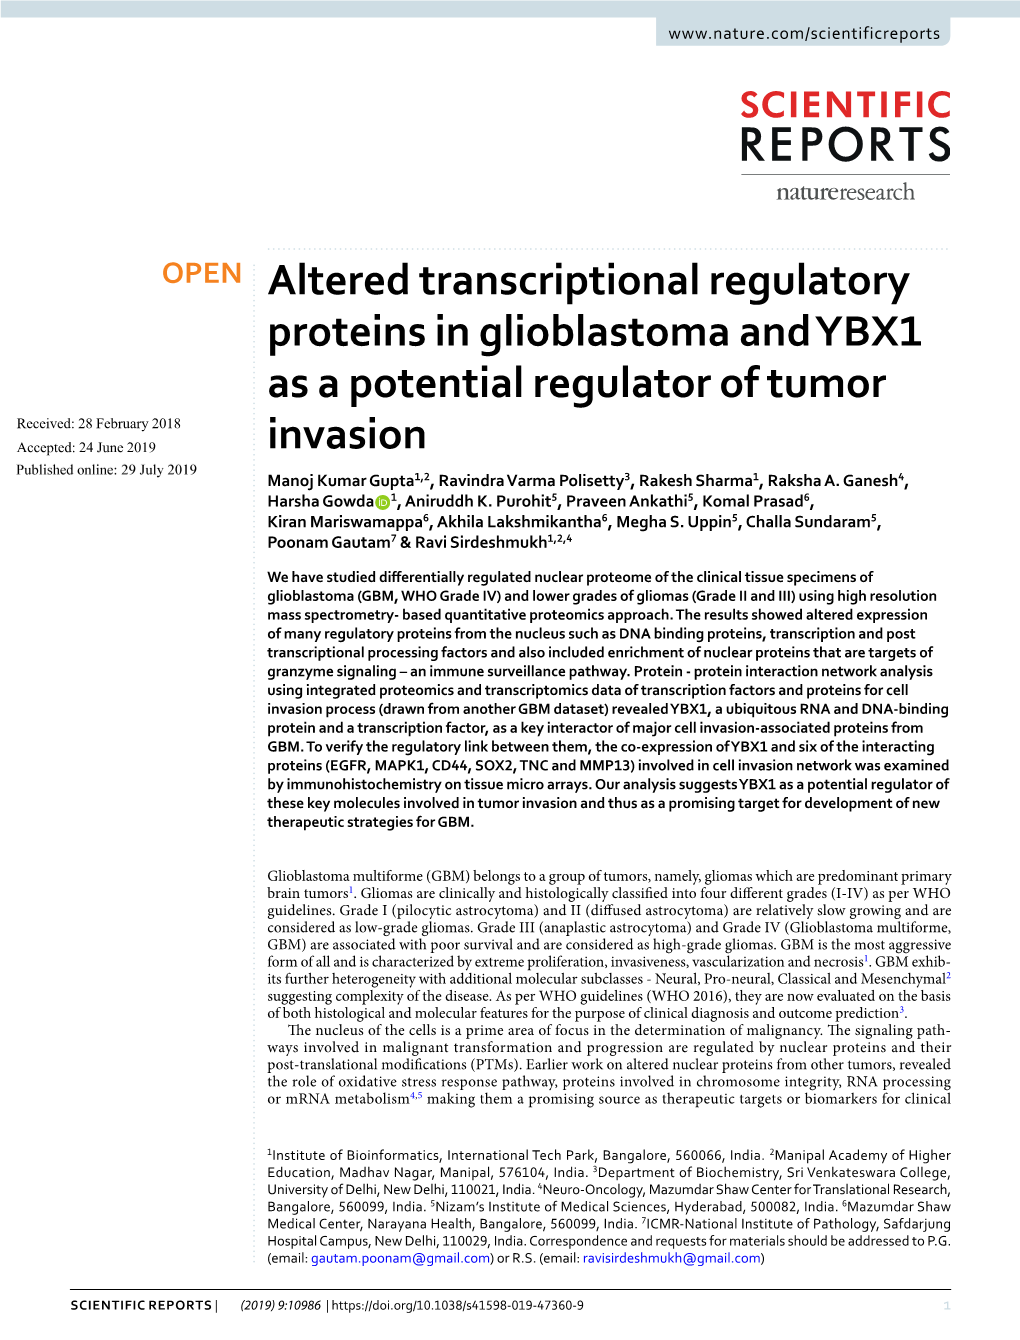 Altered Transcriptional Regulatory Proteins in Glioblastoma and YBX1